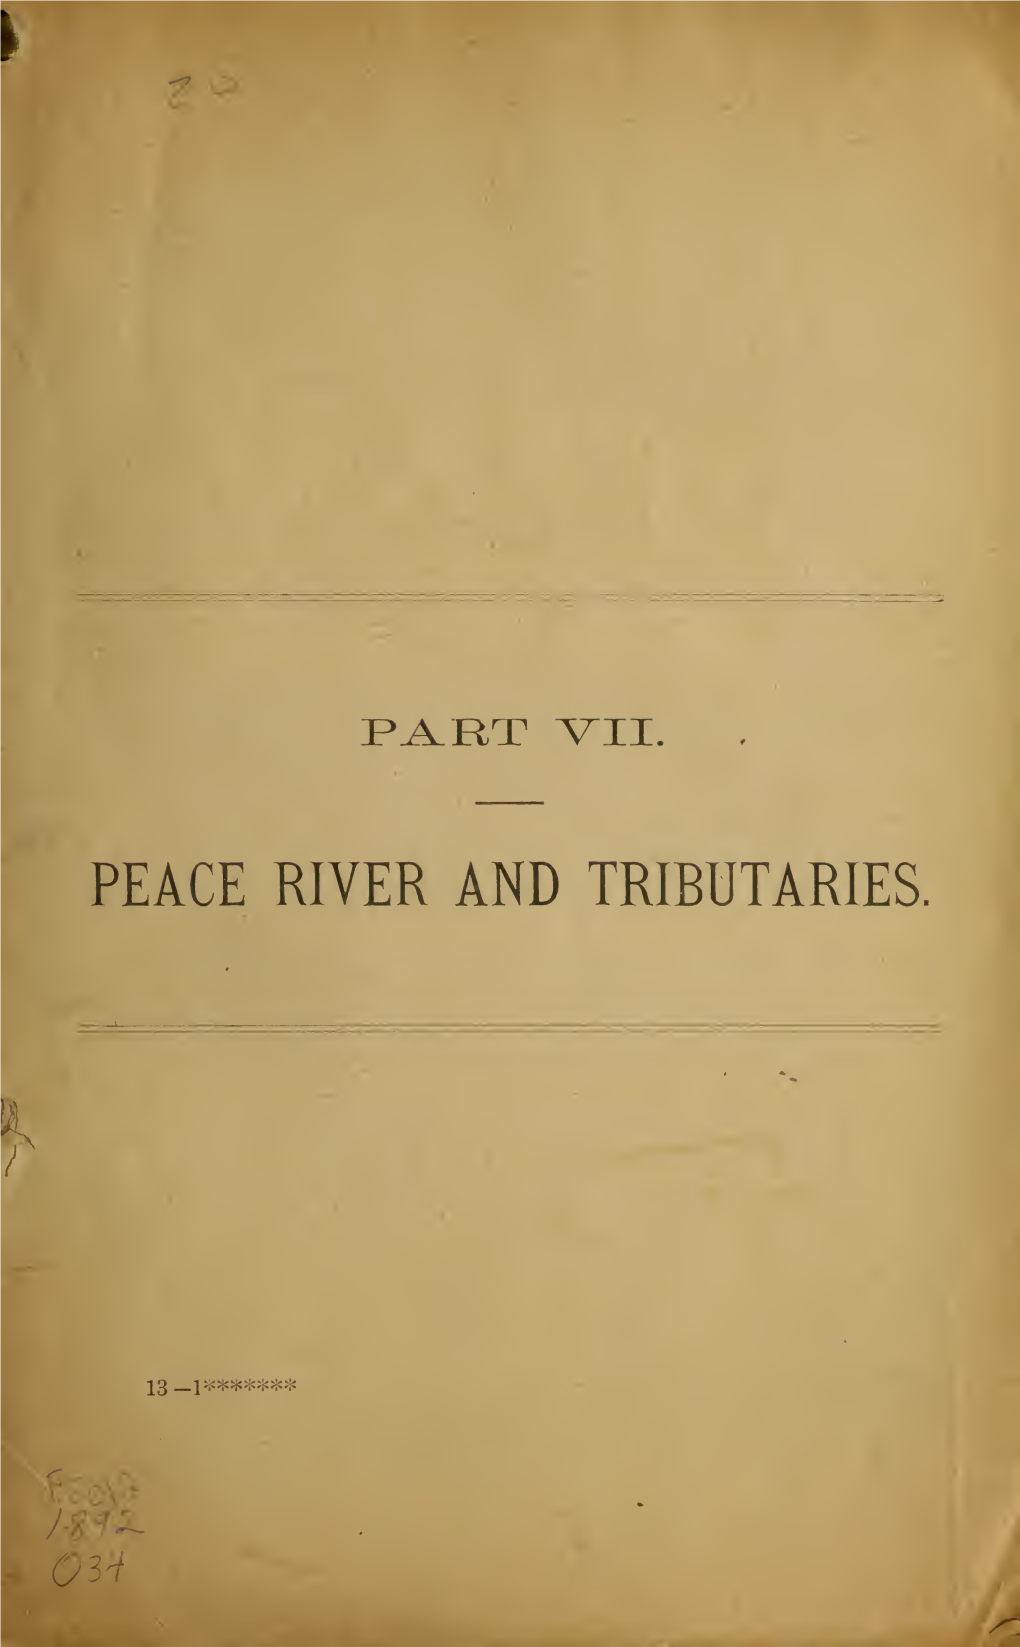 Report on the Peace River and Tributaries in 1891, by Wm